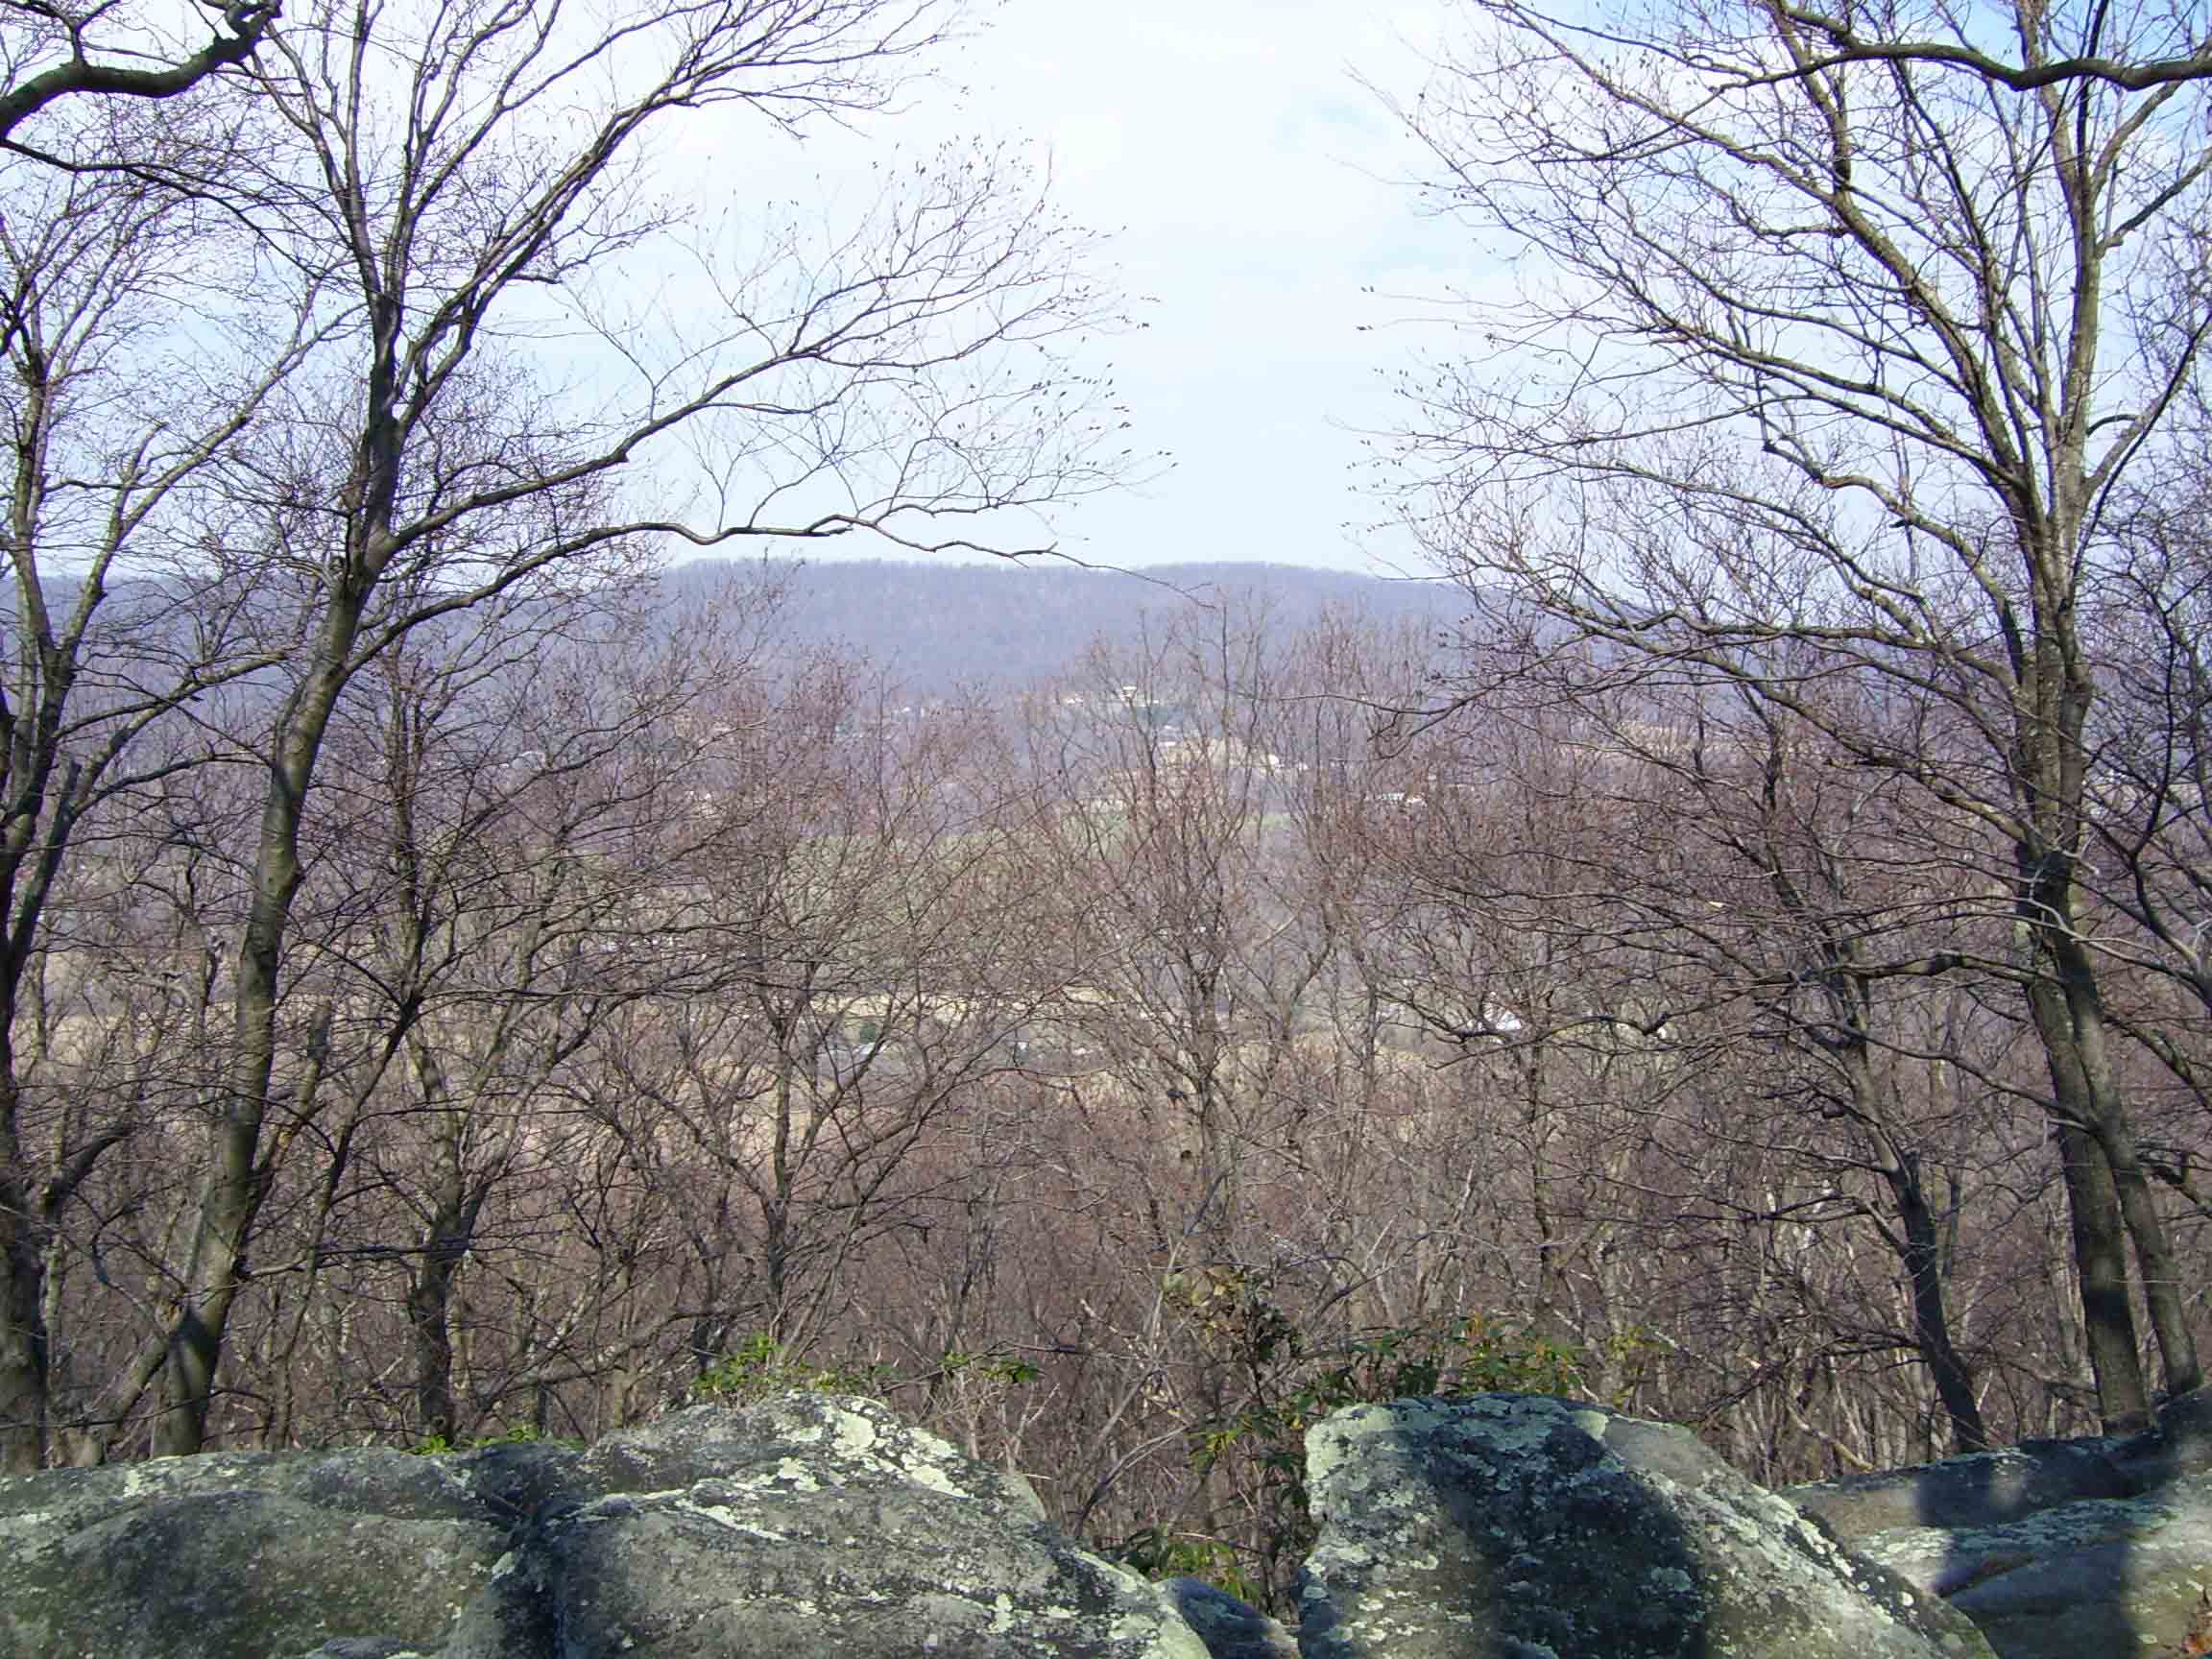 Except for the spectacular view at Weverton Cliffs, views are few in this section. The AT guide advertises a mediocre winter view west towards Pleasant Valley and Elk Ridge at mile 3.1. This was taken from that view point in March 2007.  Courtesy dlcul@conncoll.edu